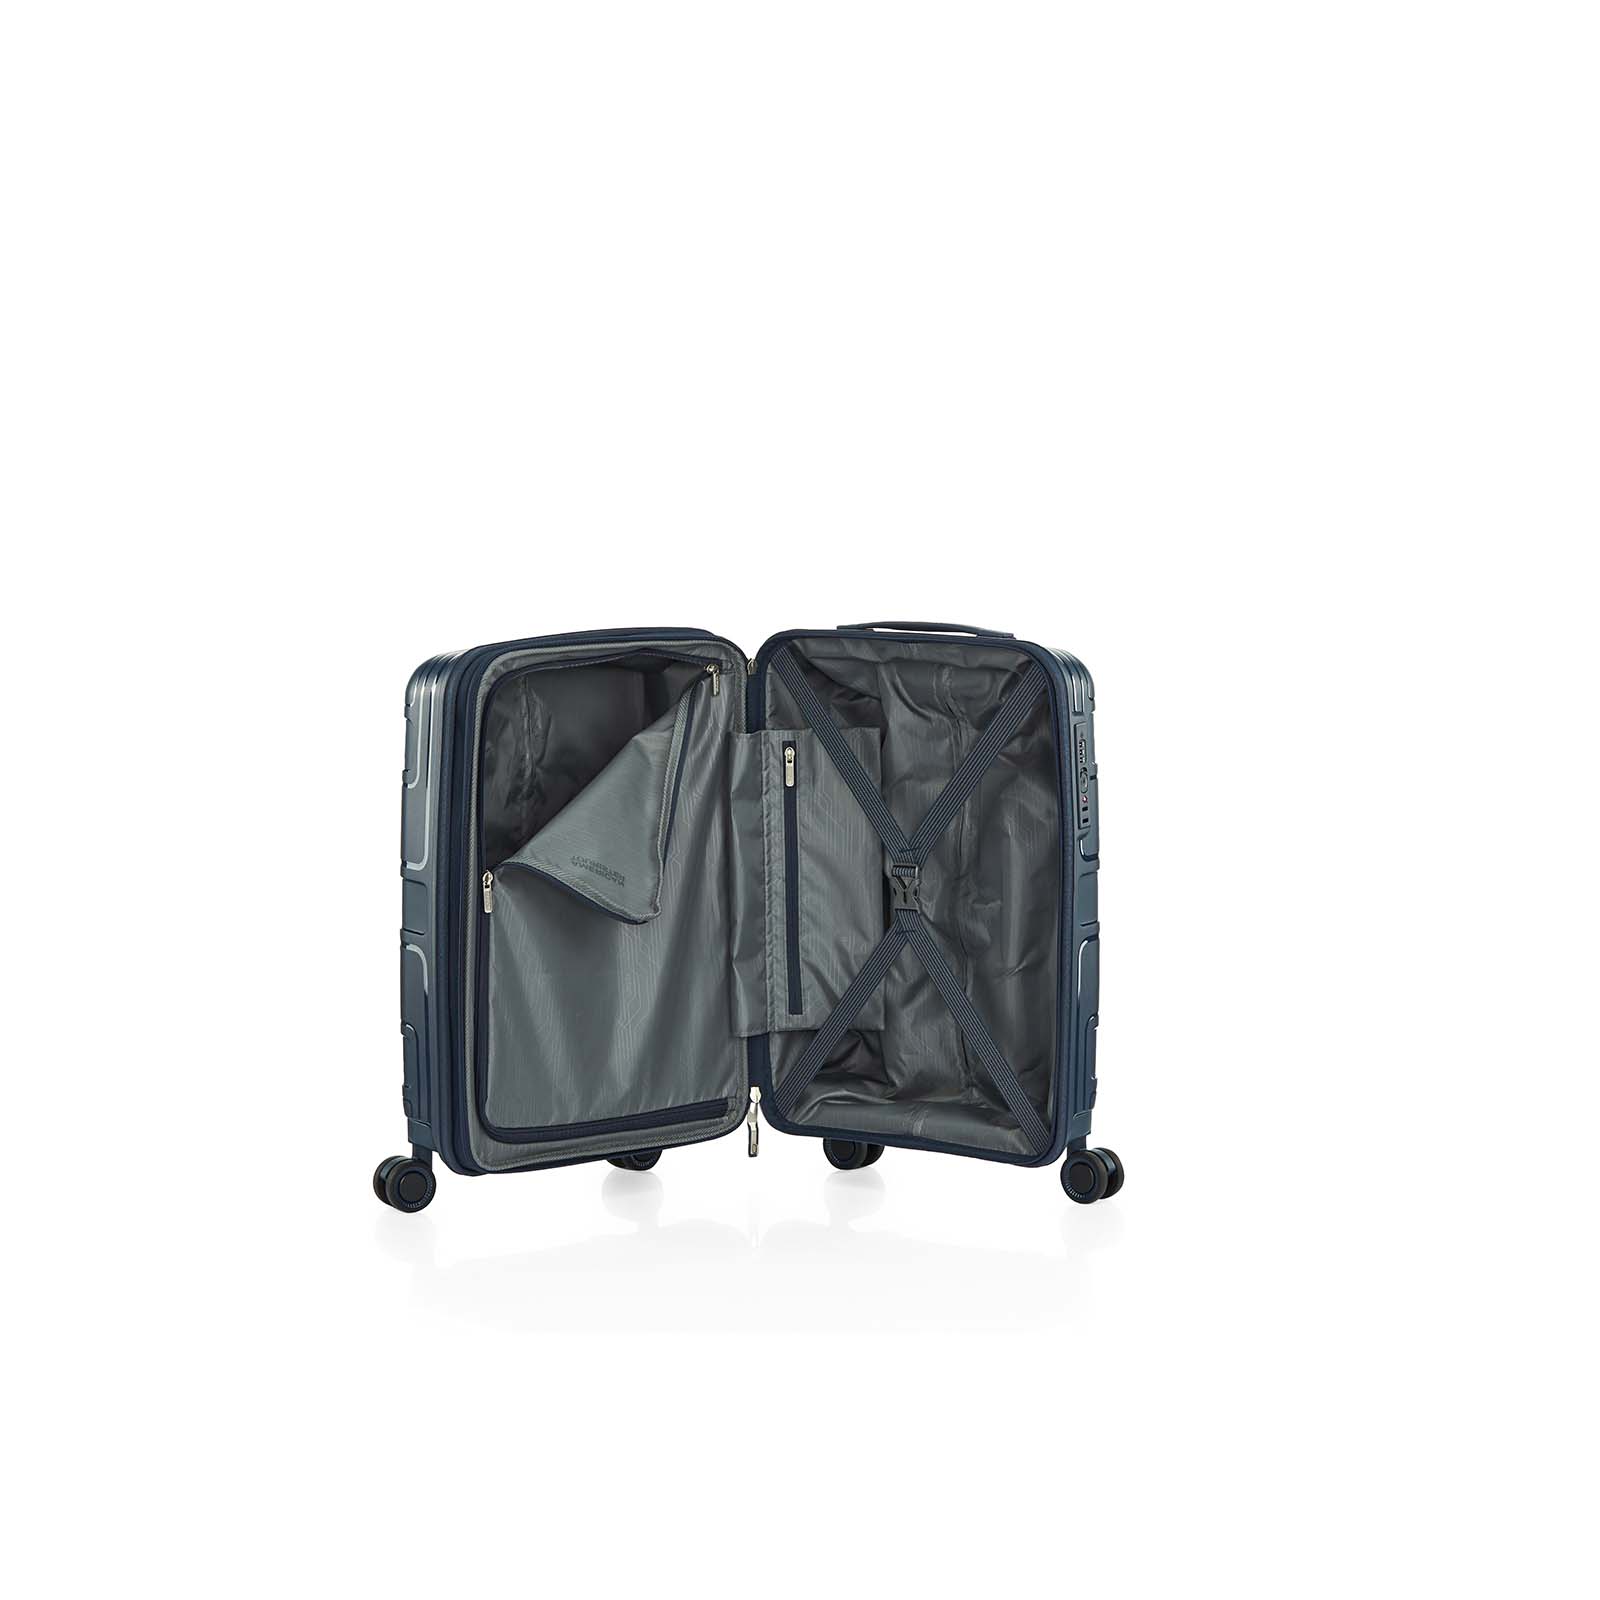 American-Tourister-Light-Max-55cm-Carry-On-Suitcase-Navy-Open